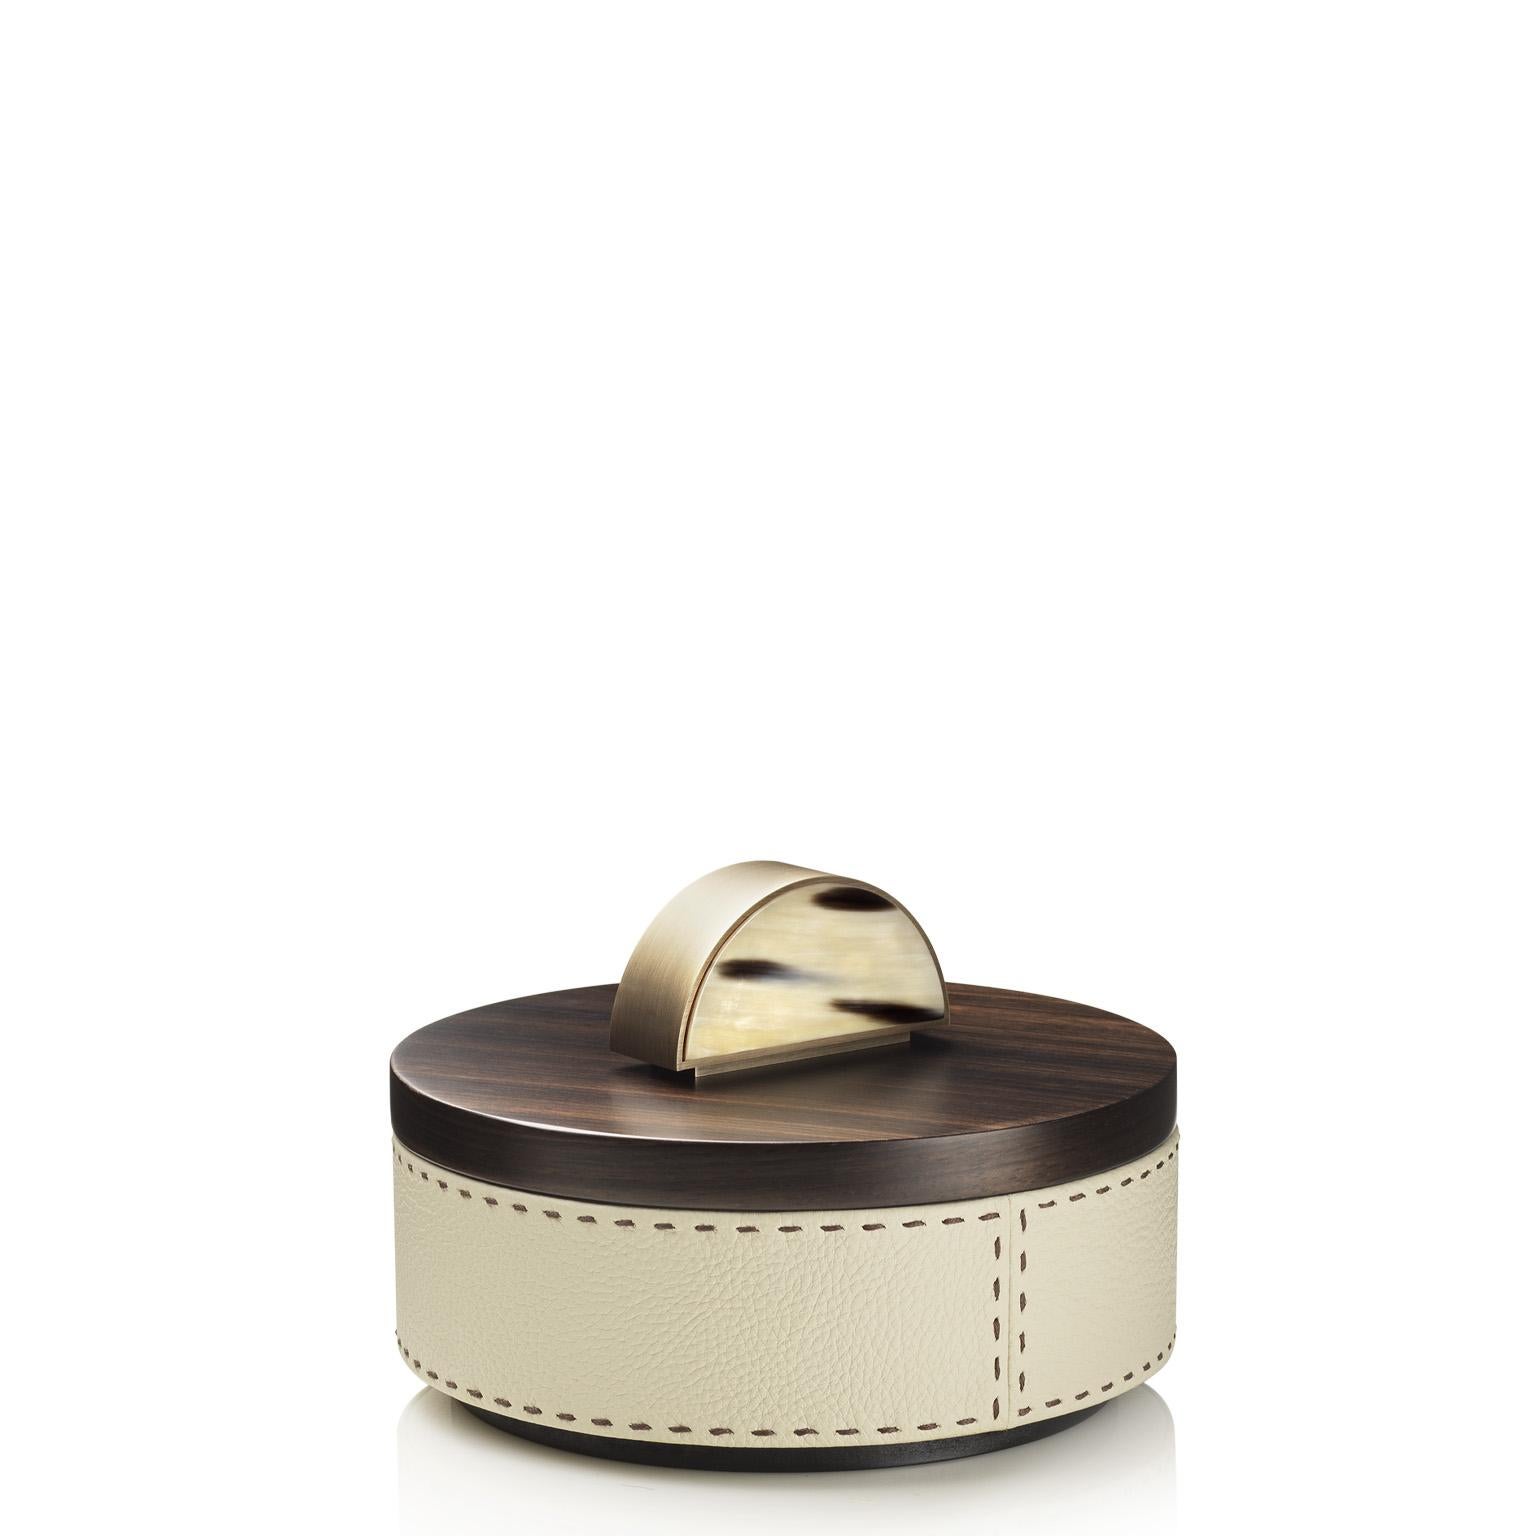 Hand-Crafted Agneta Round Box in Pebbled Leather with Handle in Corno Italiano, Mod. 4482 For Sale